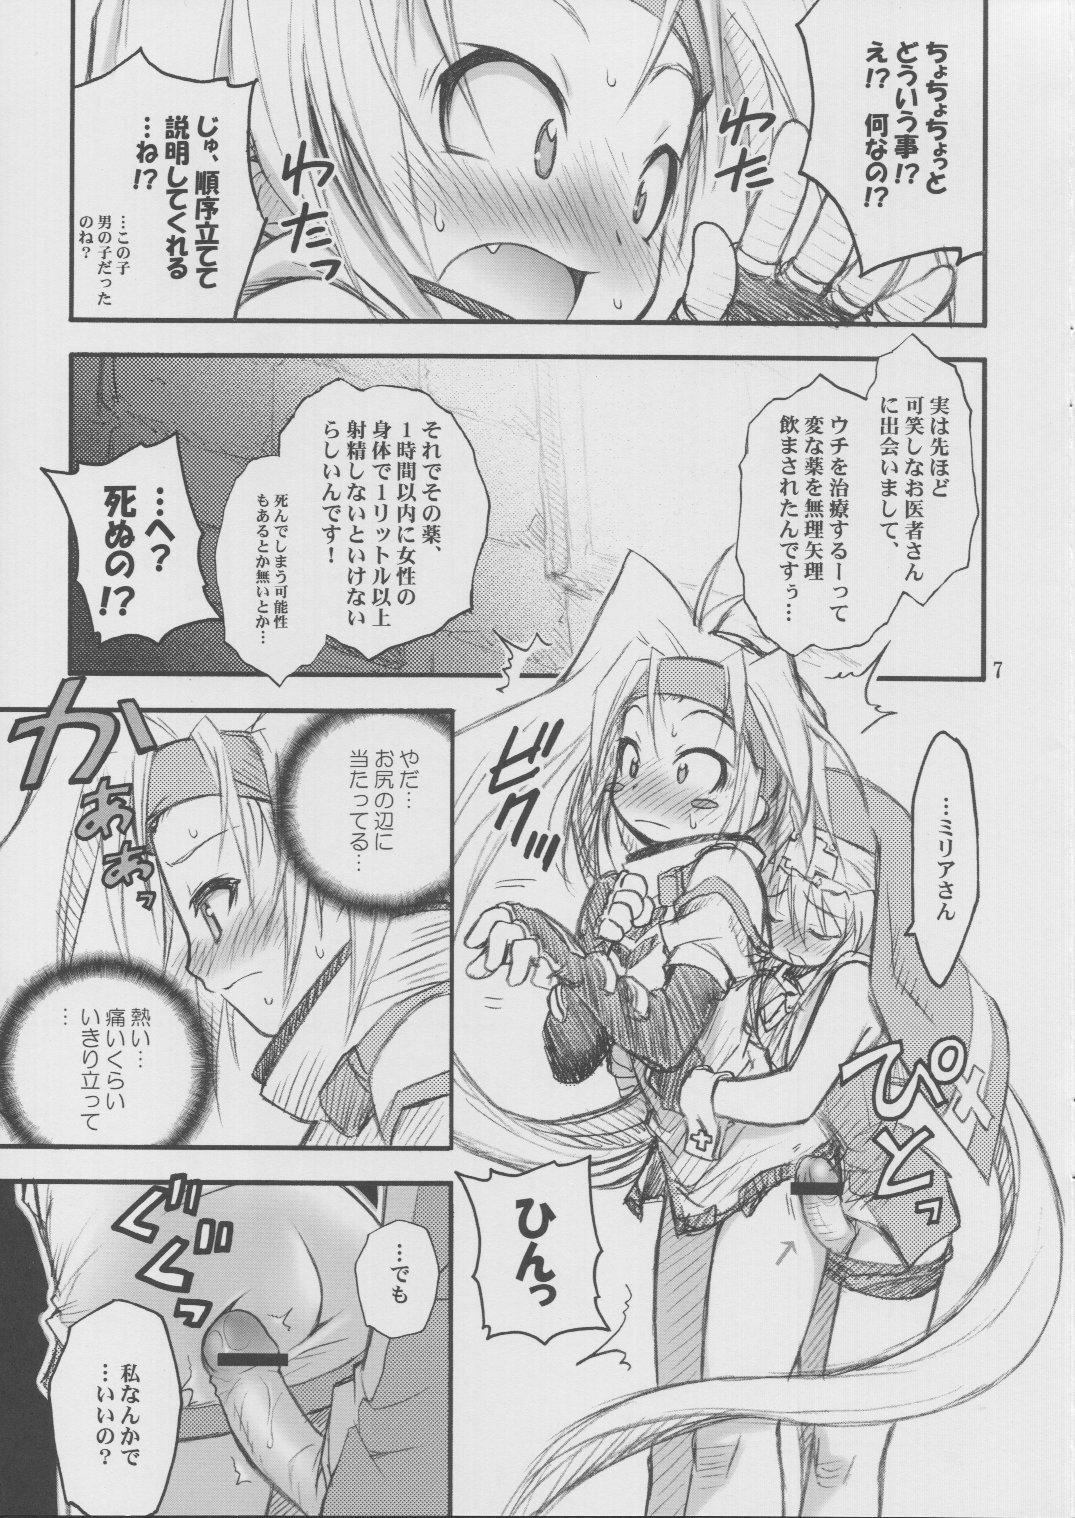 Caught Anone. - Guilty gear Sexcams - Page 6